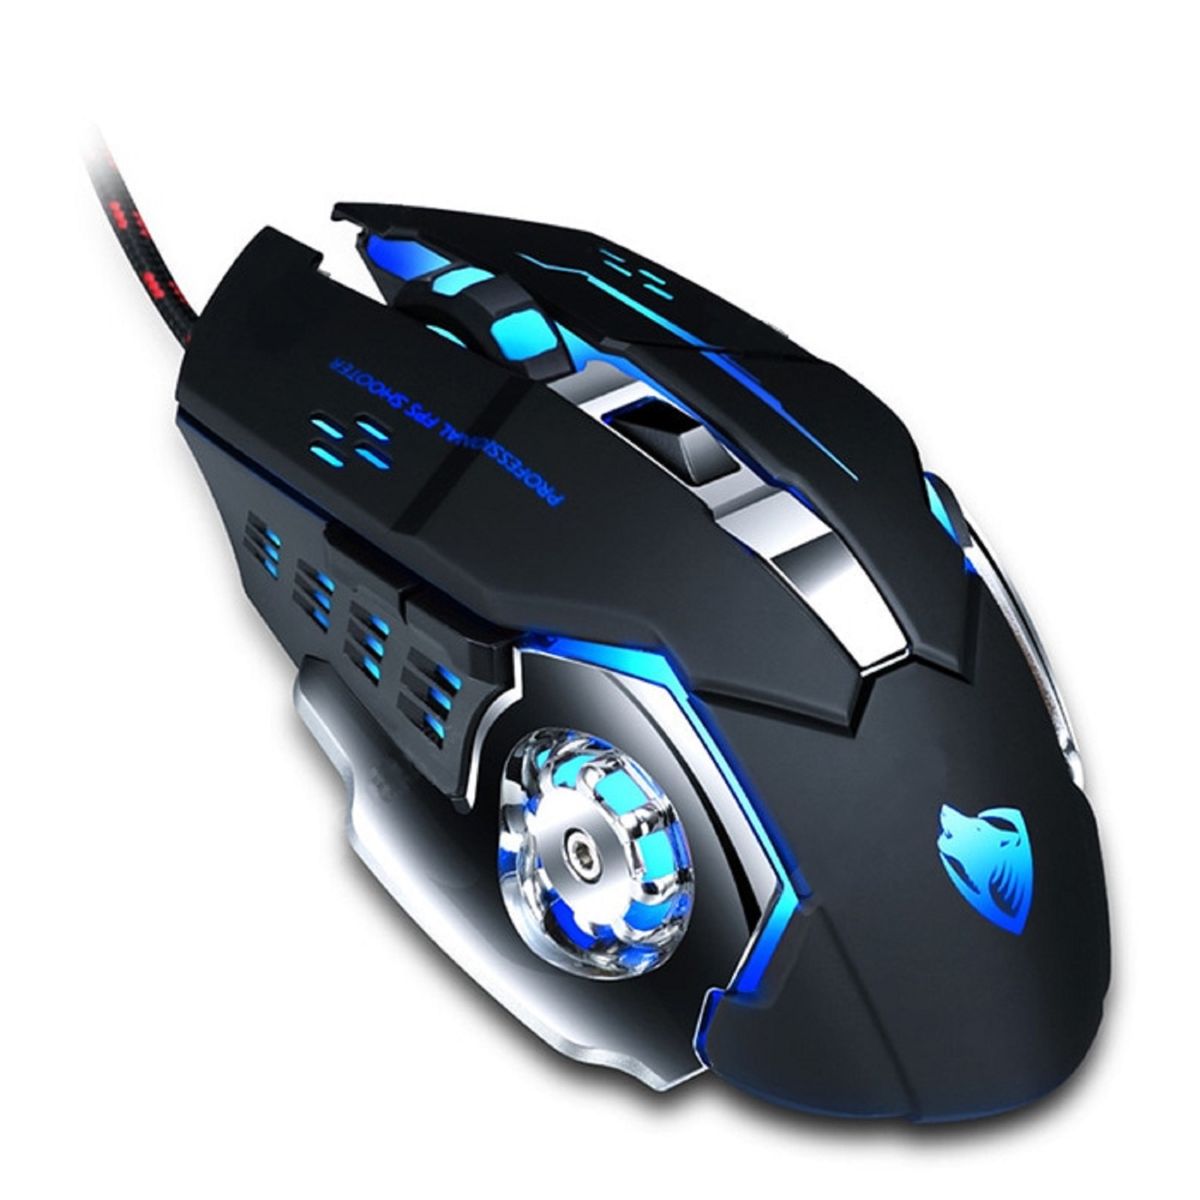 TWolf Q13B LED Gaming Mouse